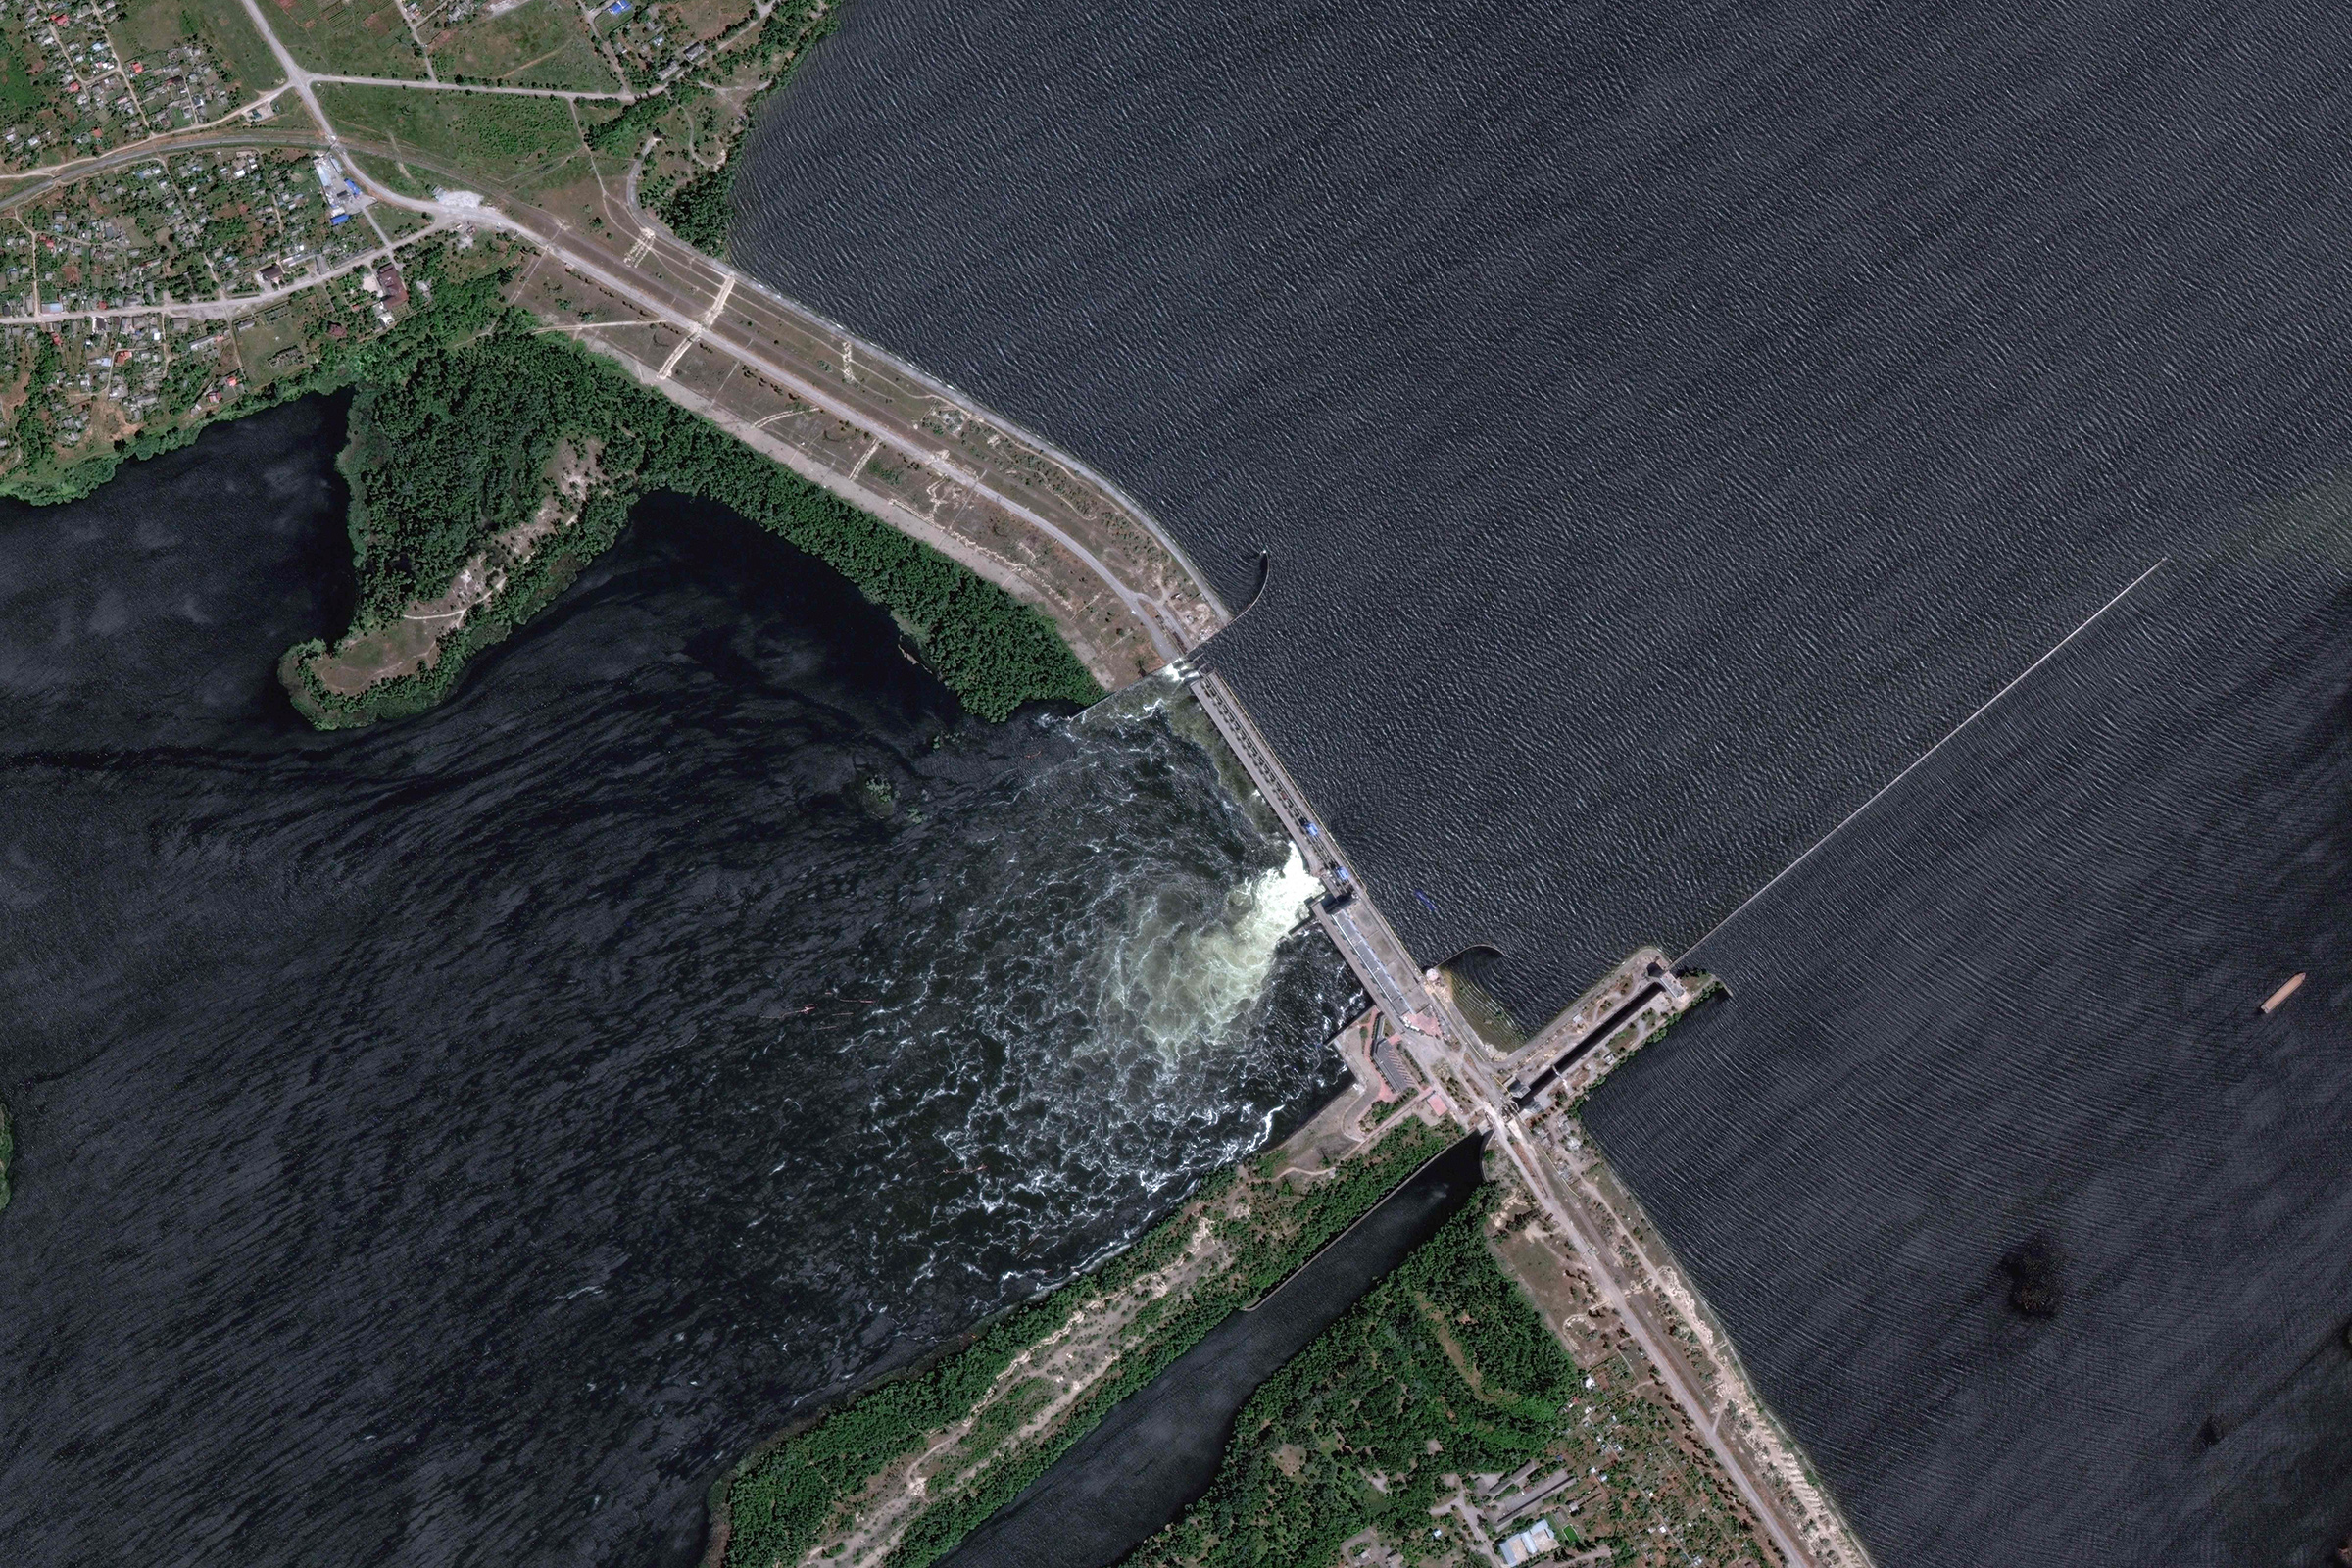 An overview of Nova Khakovka dam in south Ukraine on June 5. (Maxar Technologies/AFP/Getty Images)